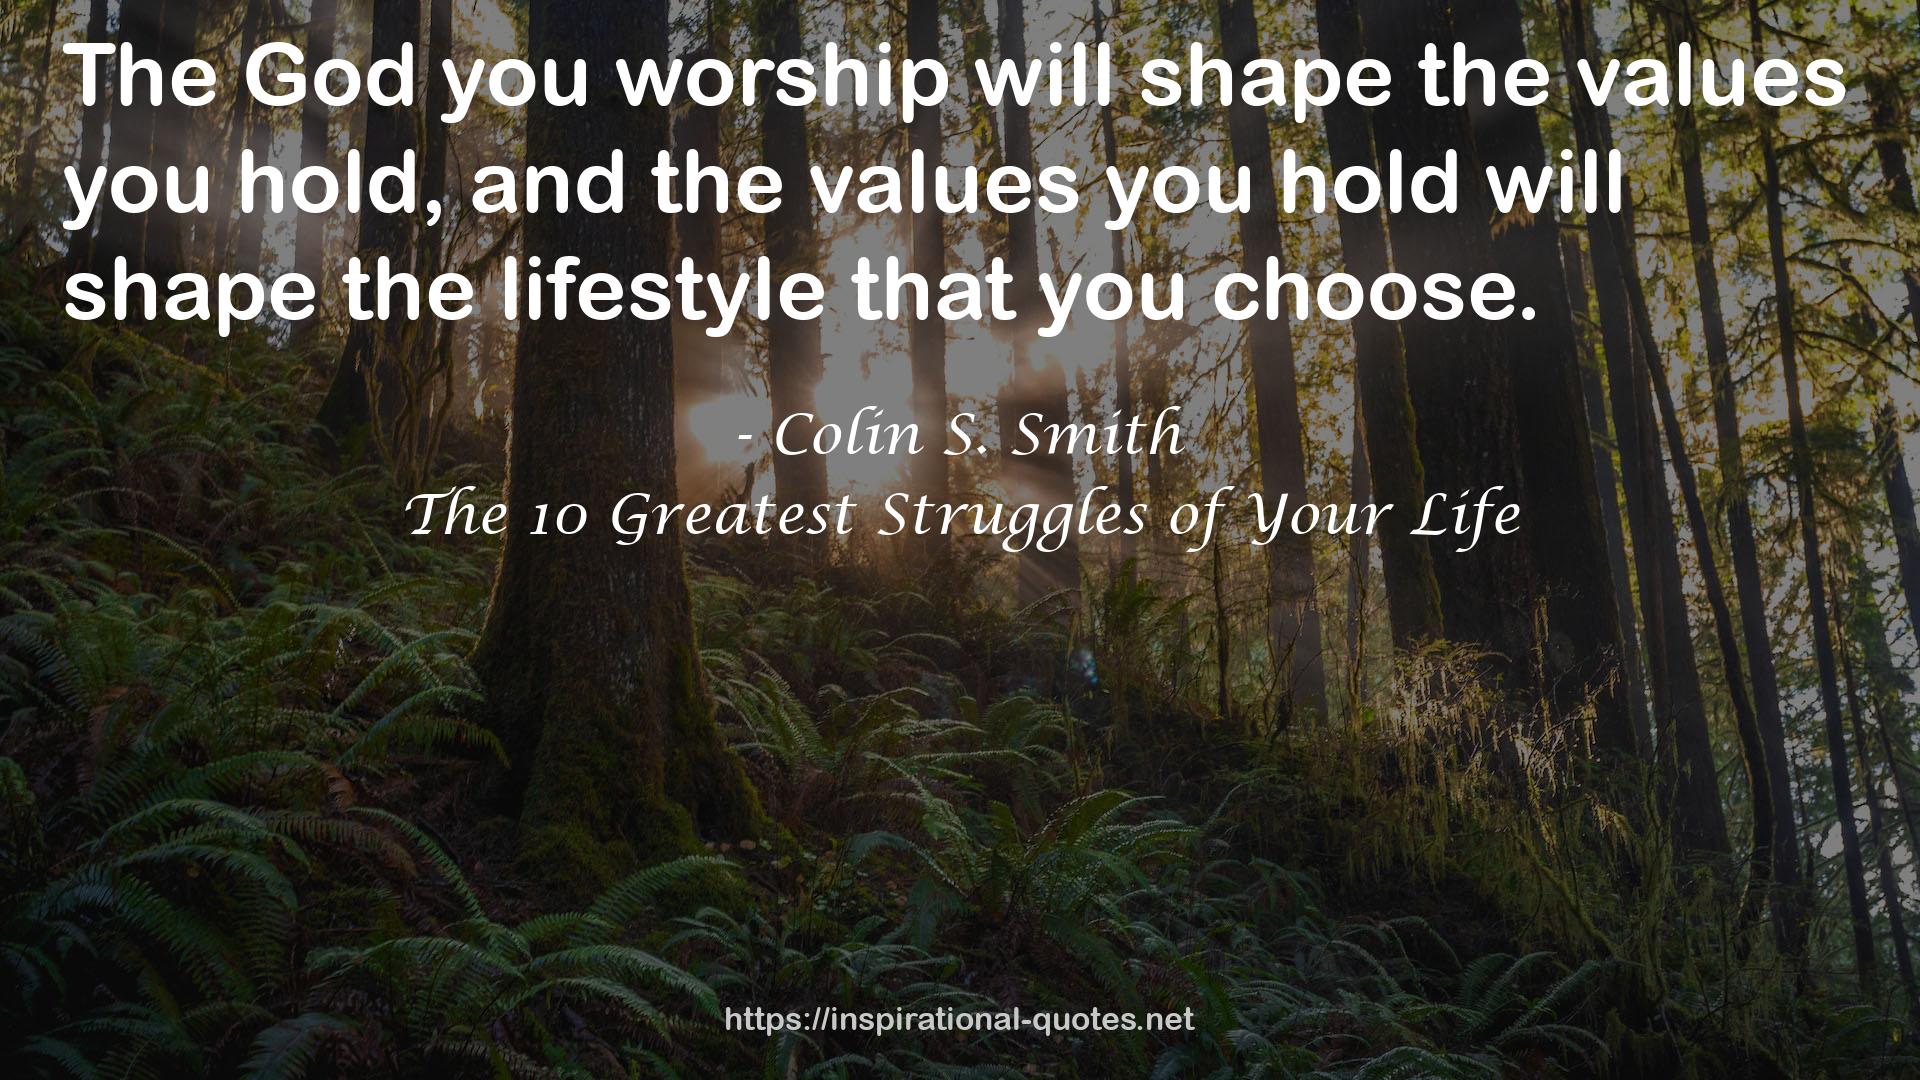 Colin S. Smith QUOTES